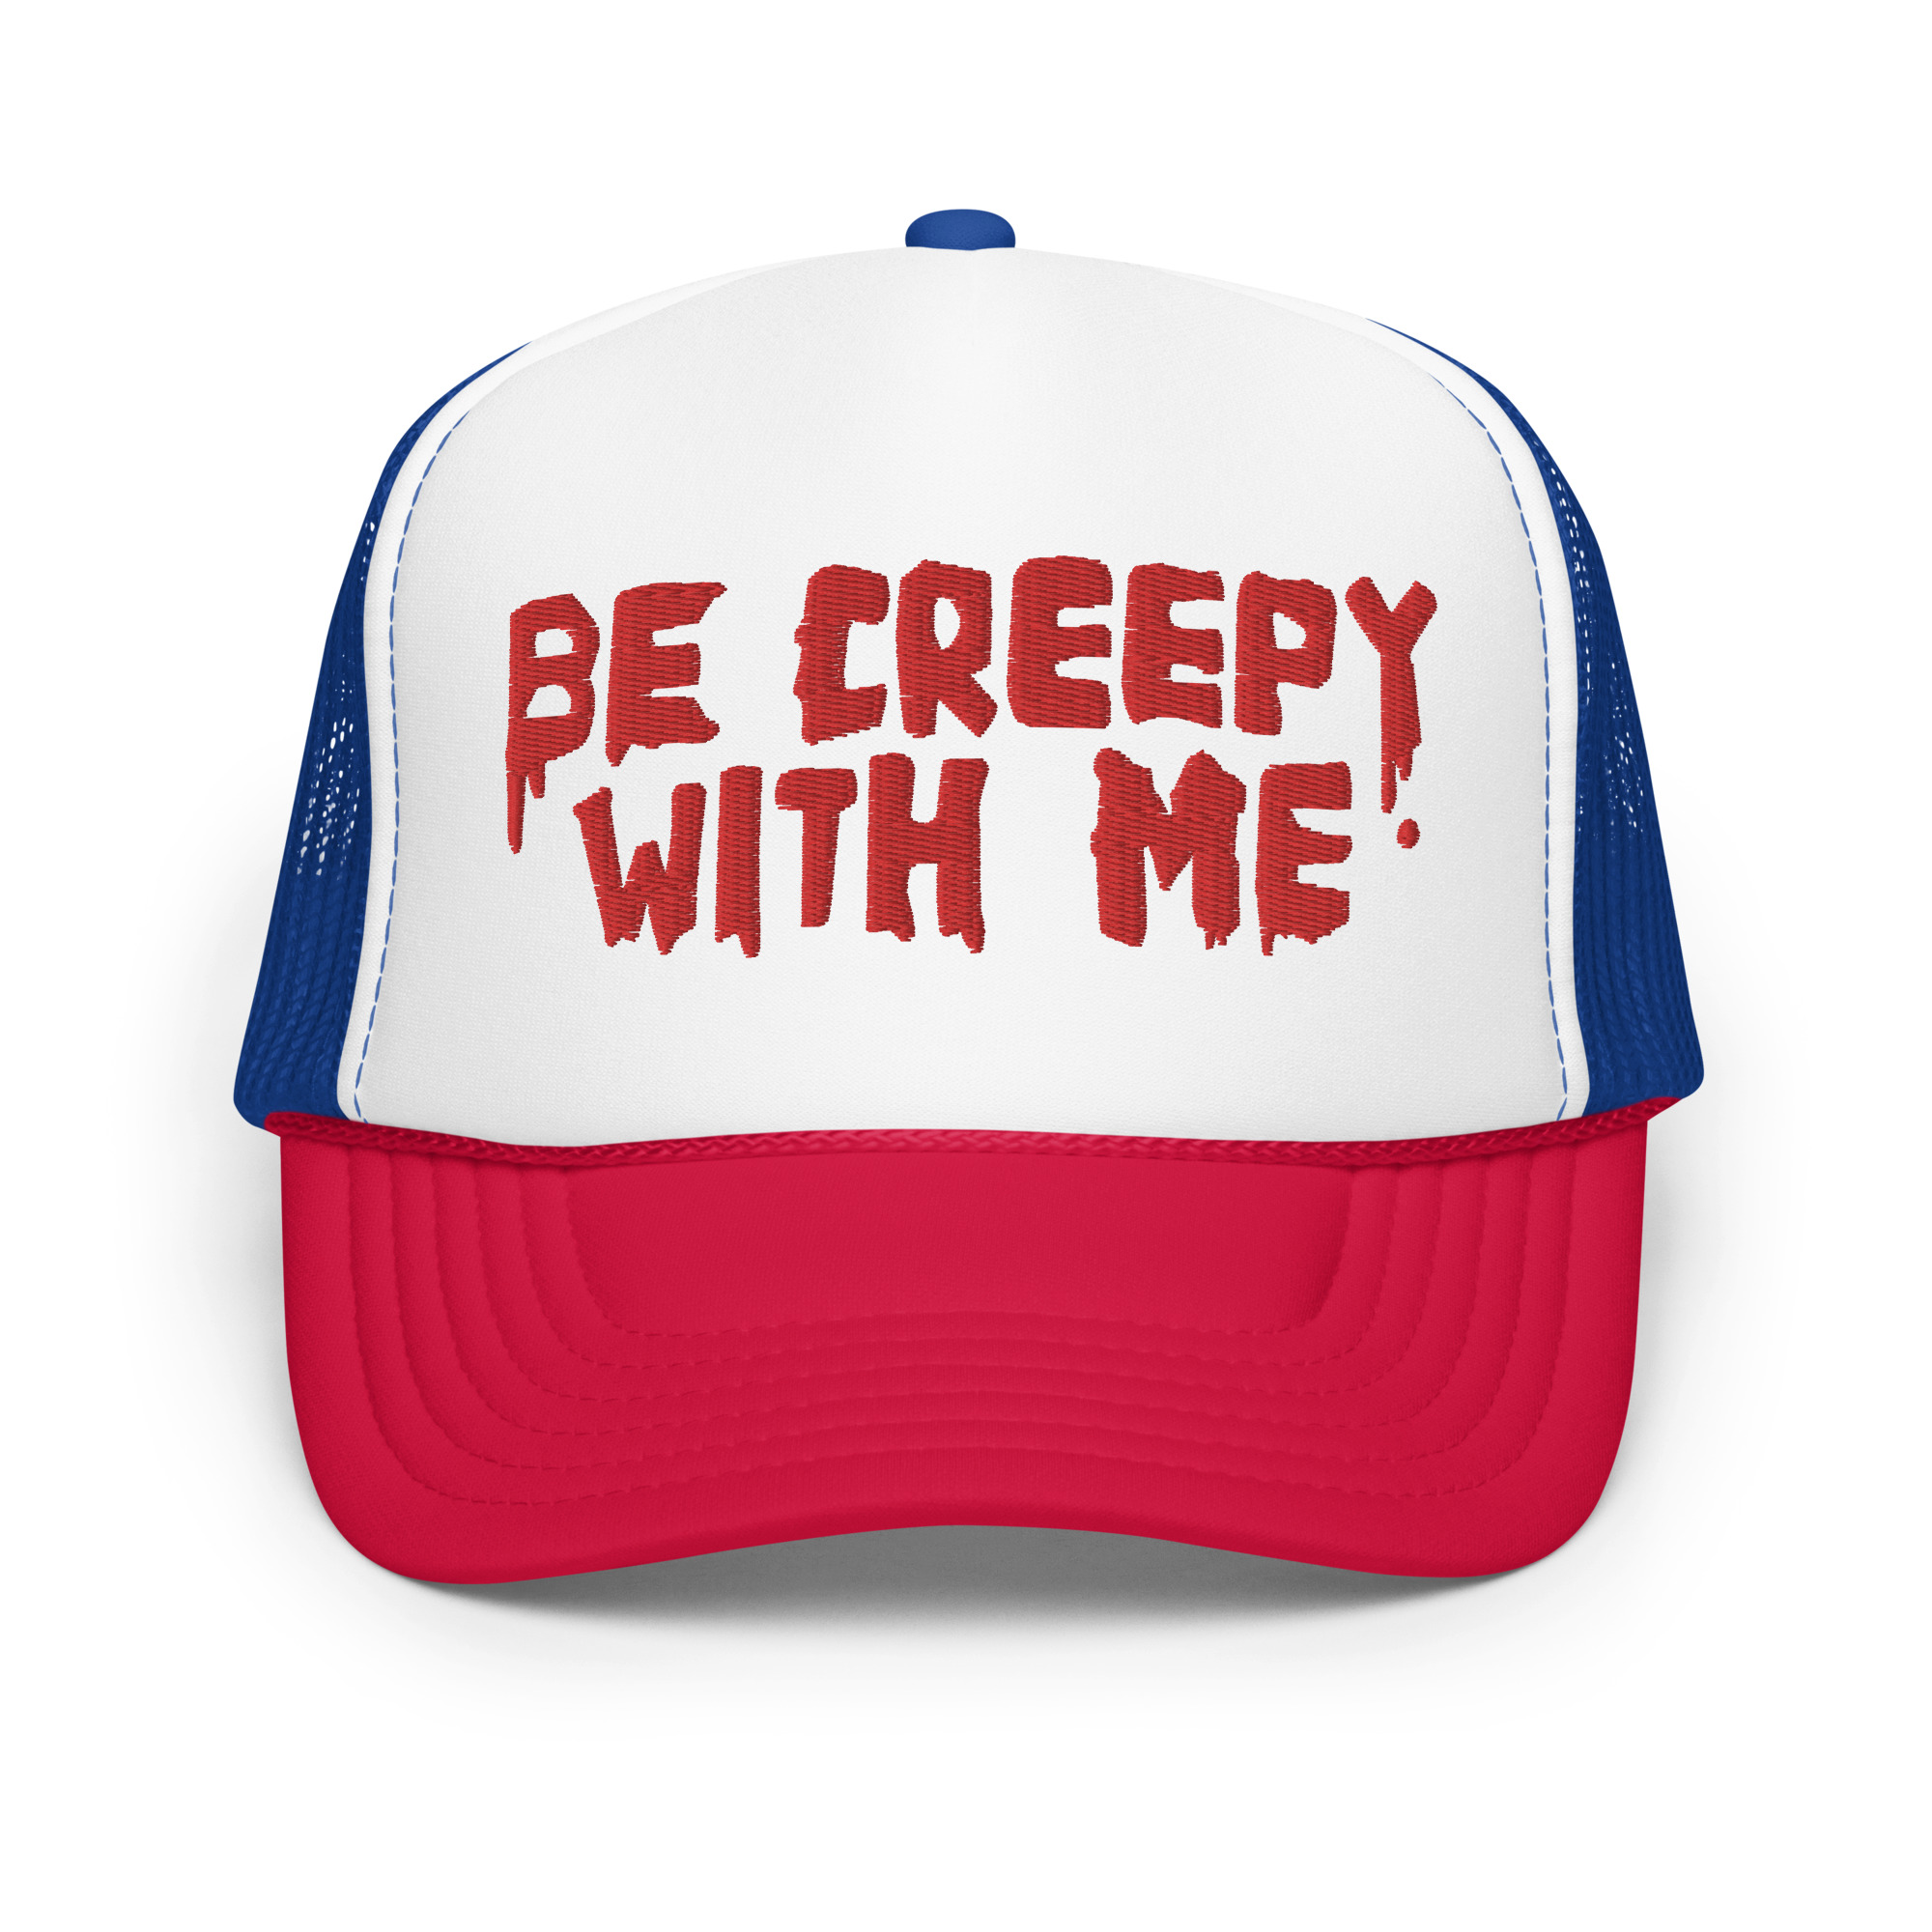 Featured image for “Be Creepy With Me - Puffy Foam trucker hat”